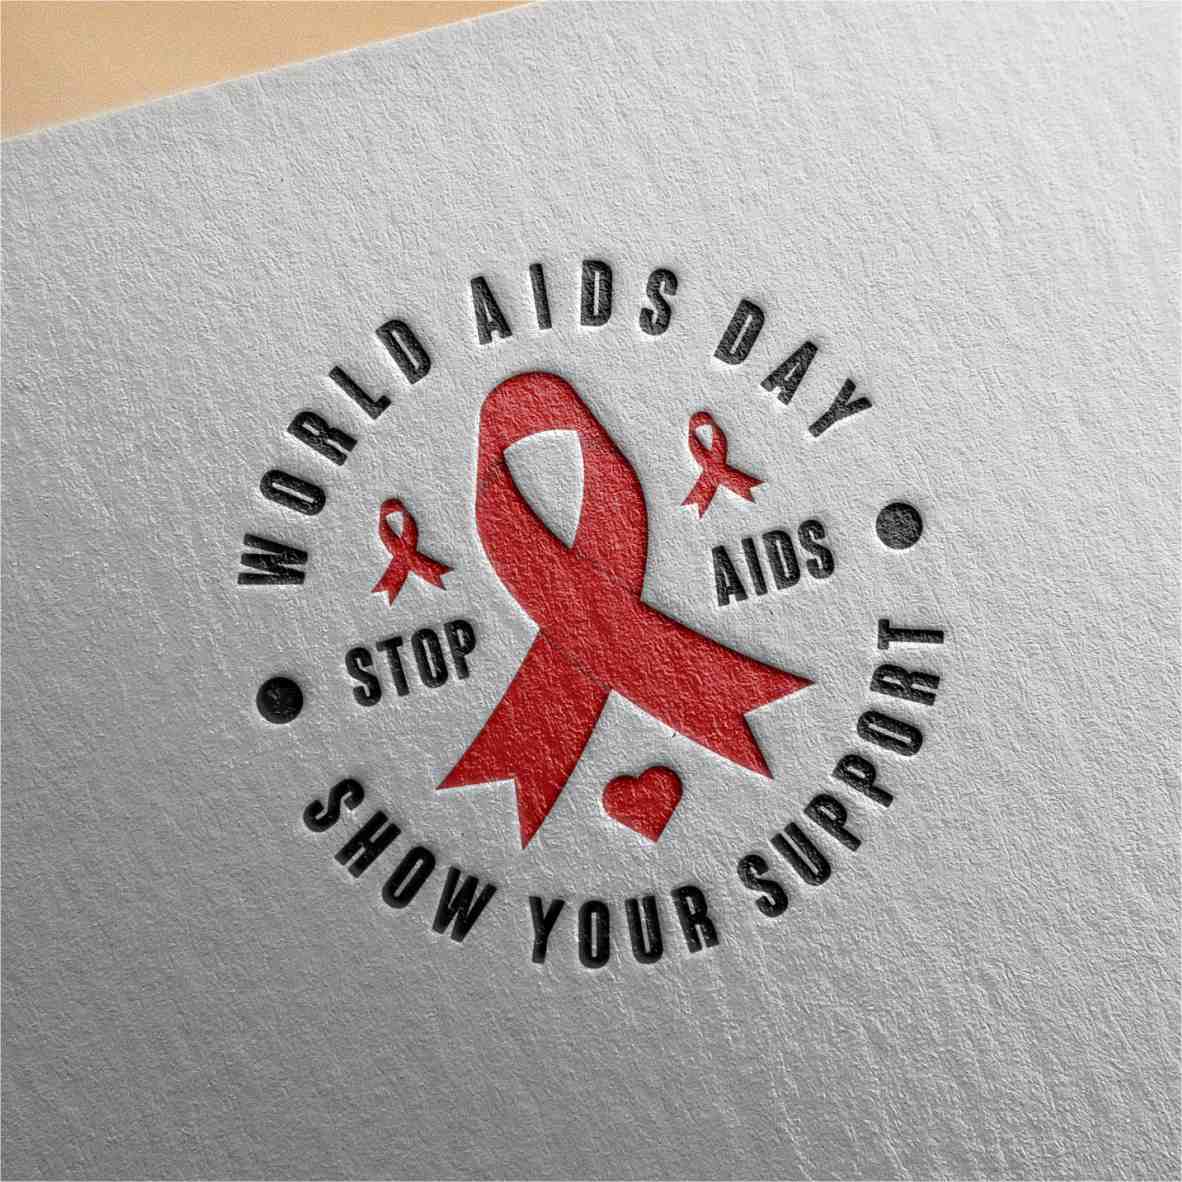 14 world aids day logo collection 7 29